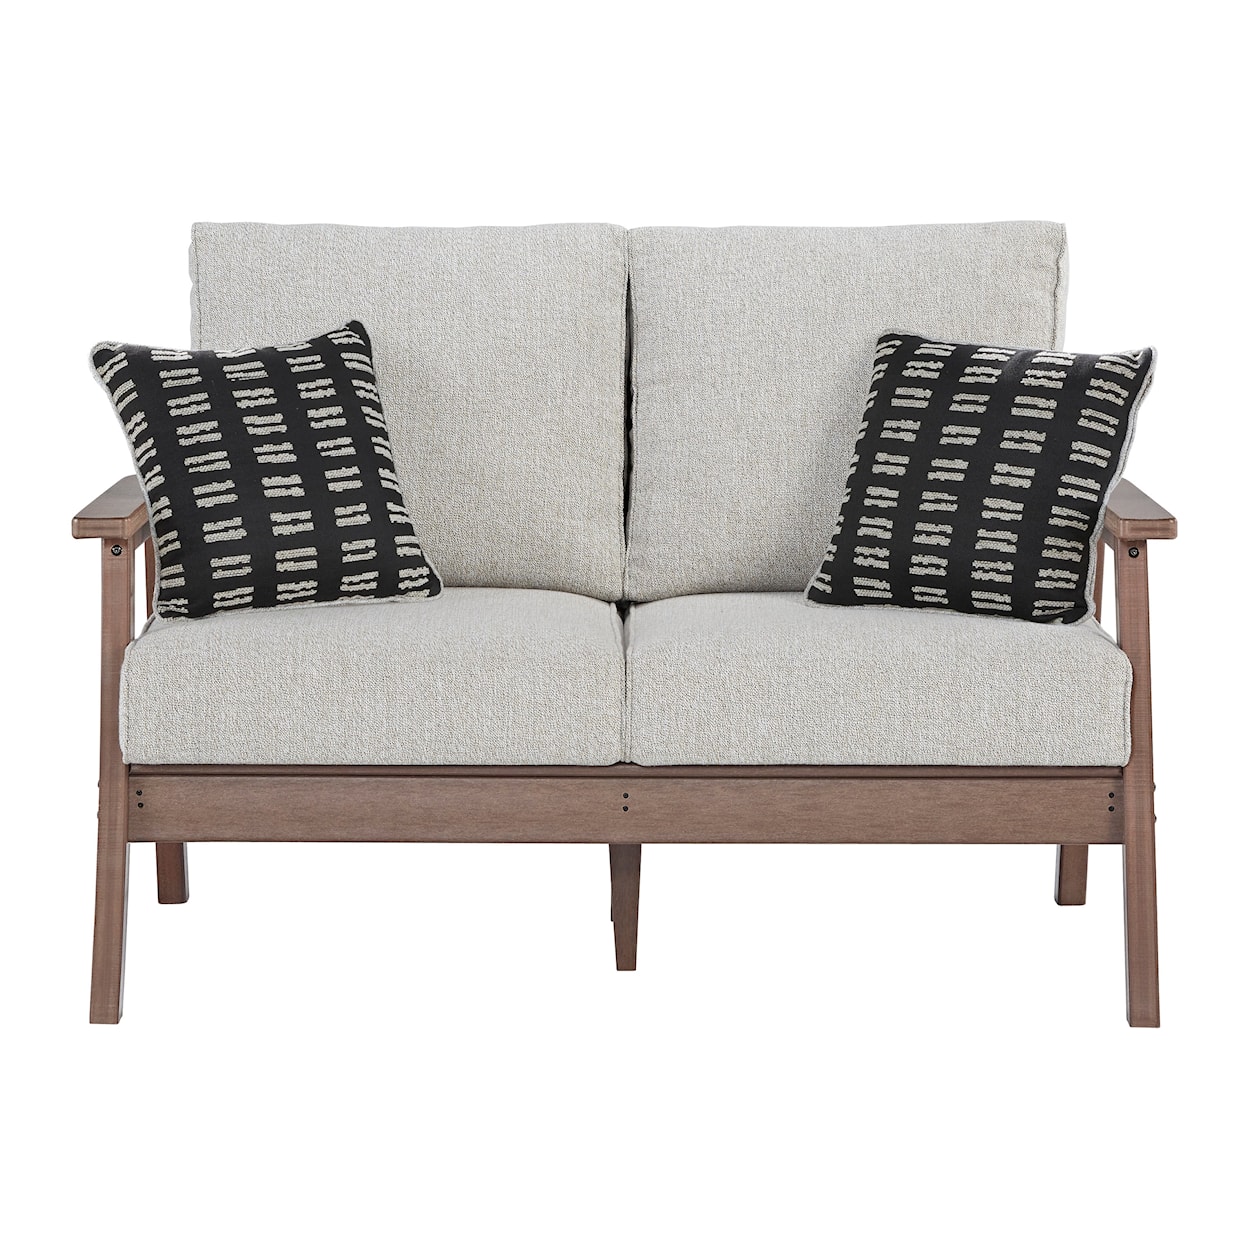 Michael Alan Select Emmeline Outdoor Loveseat with Cushion